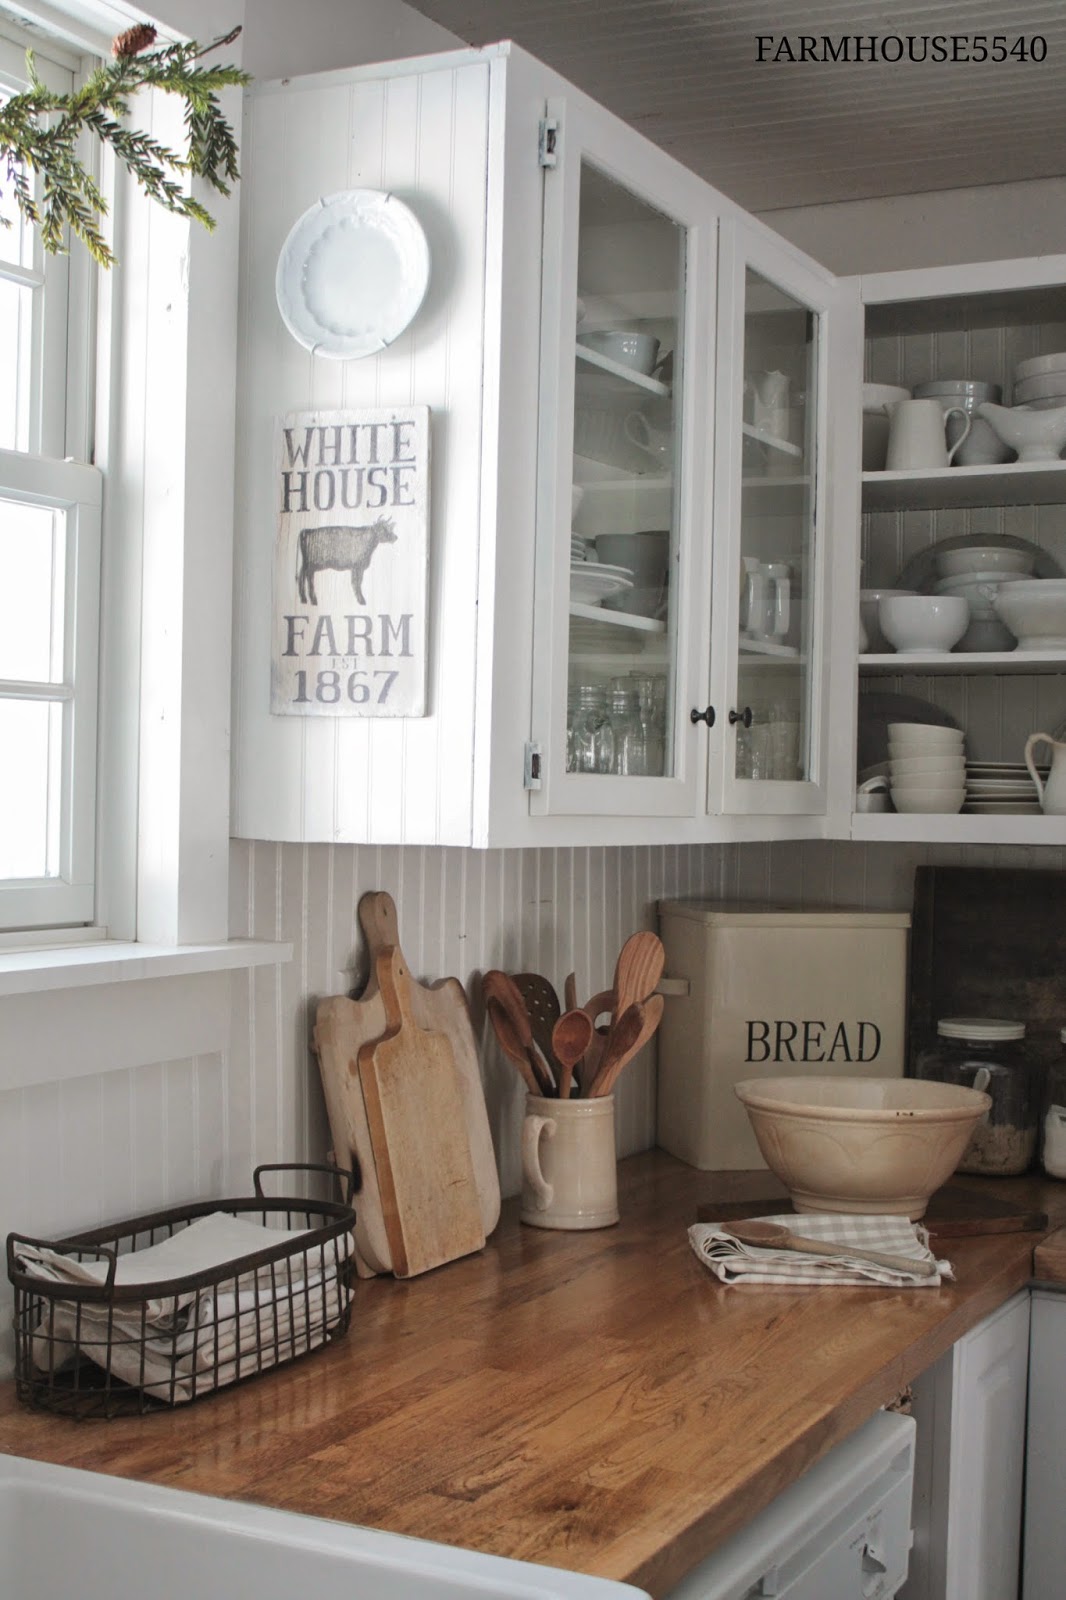 Our Guest Cottage Kitchen: Budget-Friendly Country Farmhouse Style